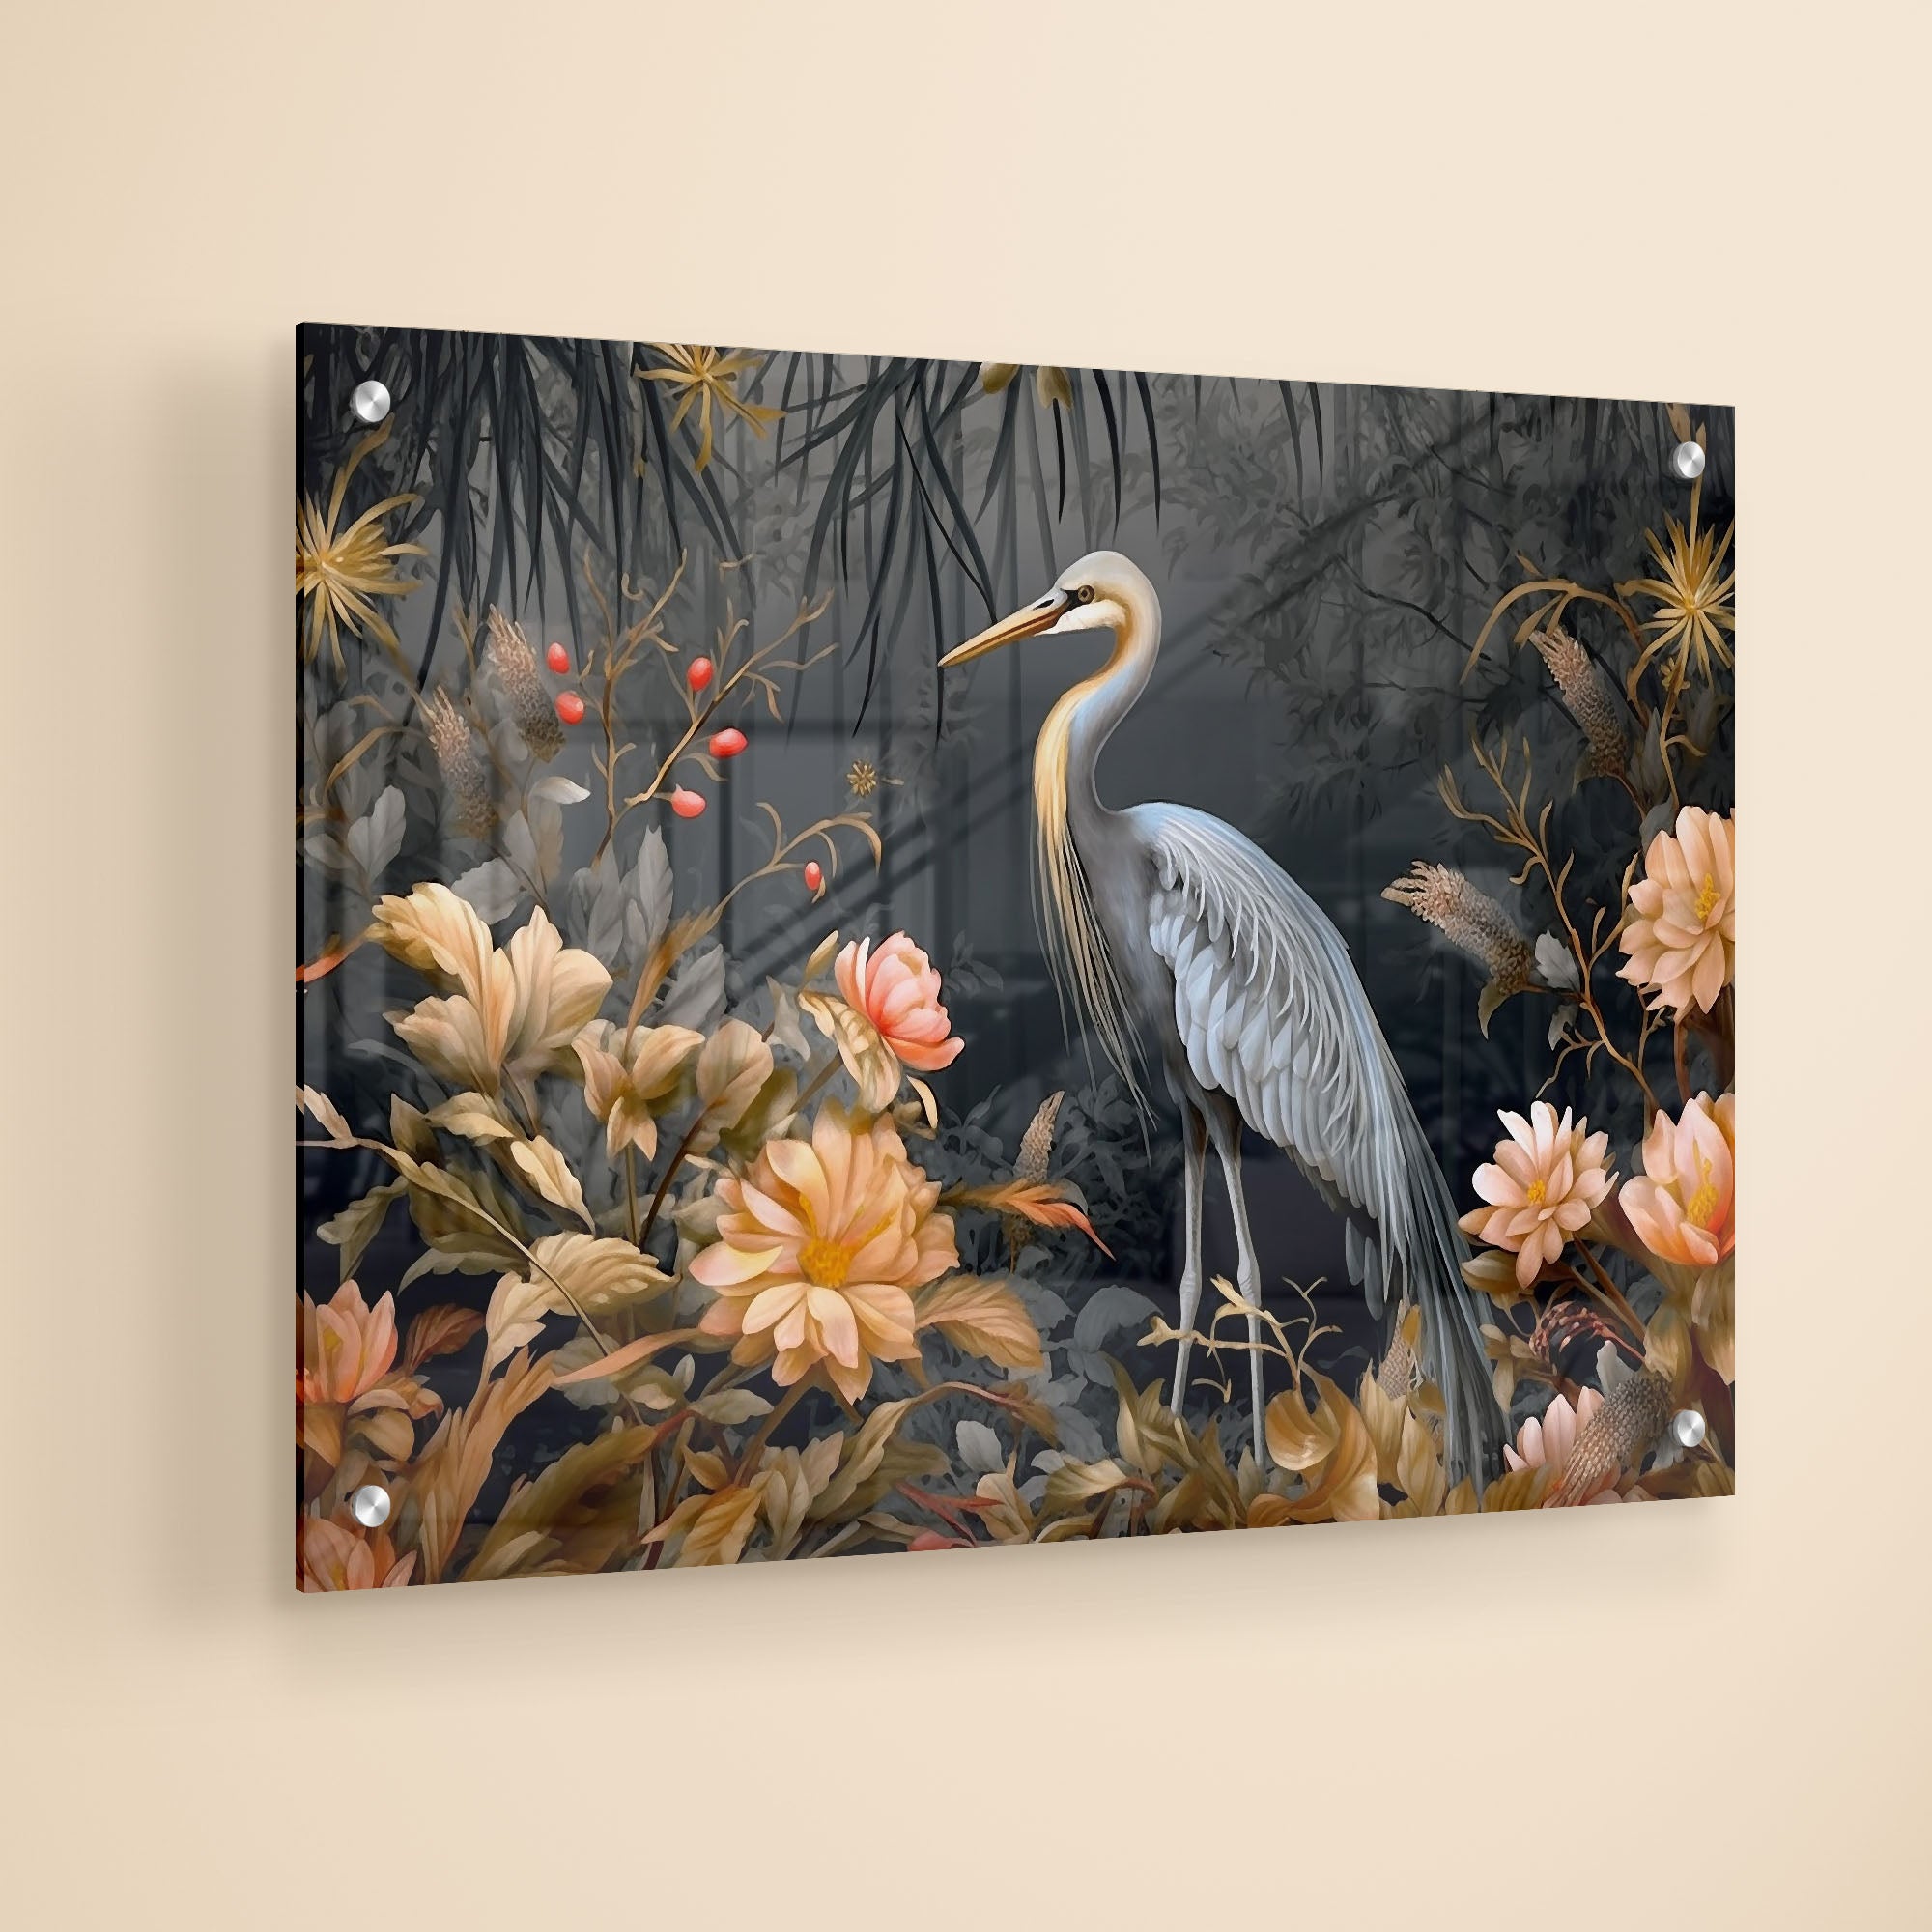 Flowers And Flamingo Acrylic Wall Painting